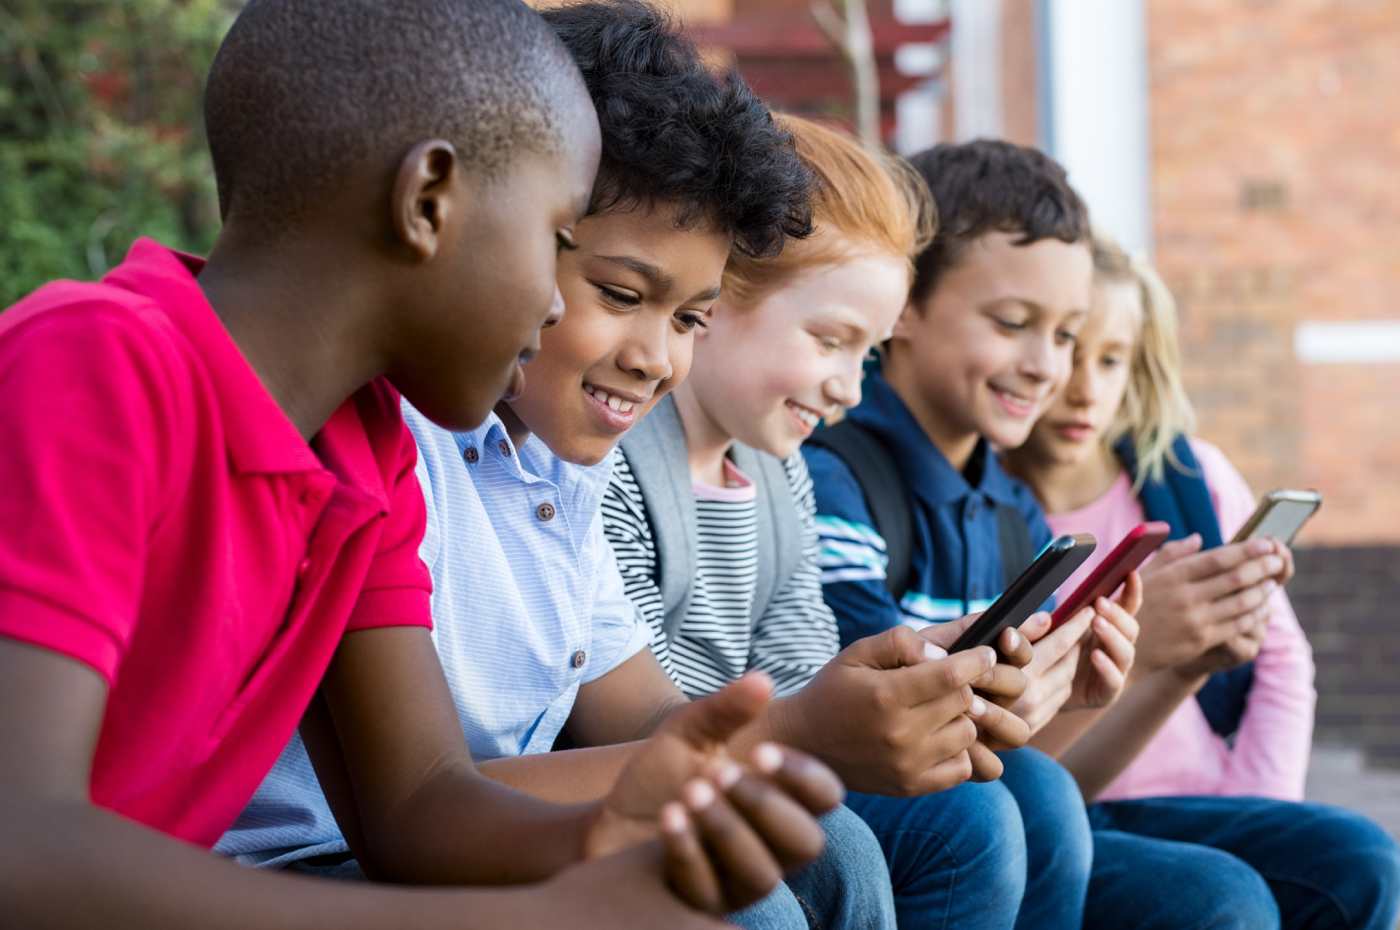 Protecting Your Kids Online Can Install Child Security App